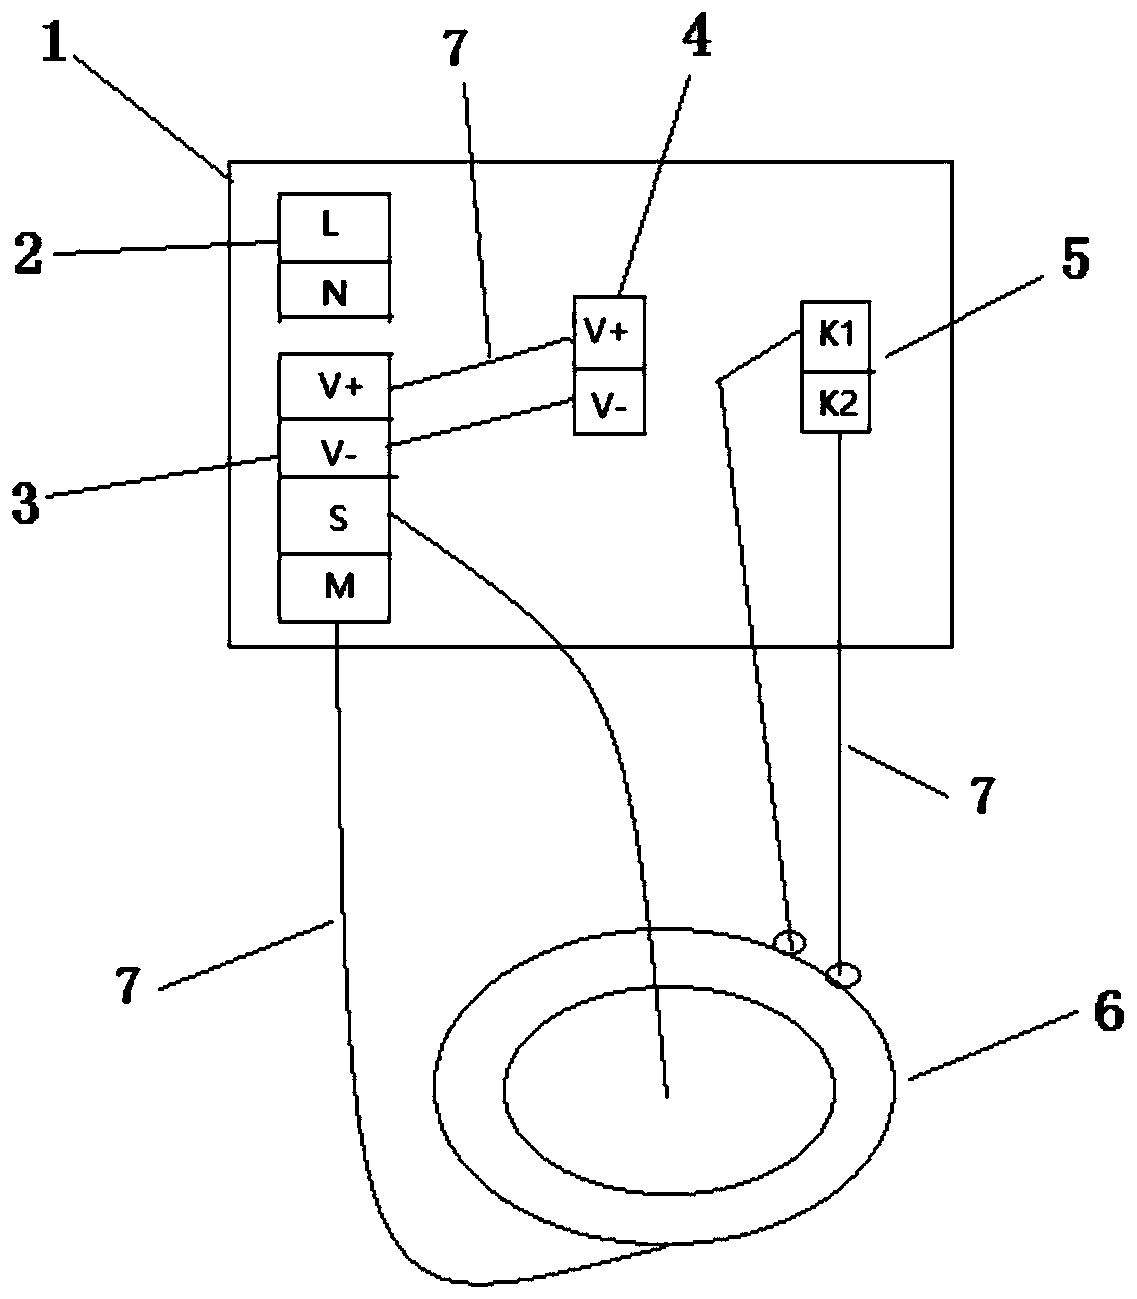 Line selection zero-sequence current polarity detection and automatic correction method